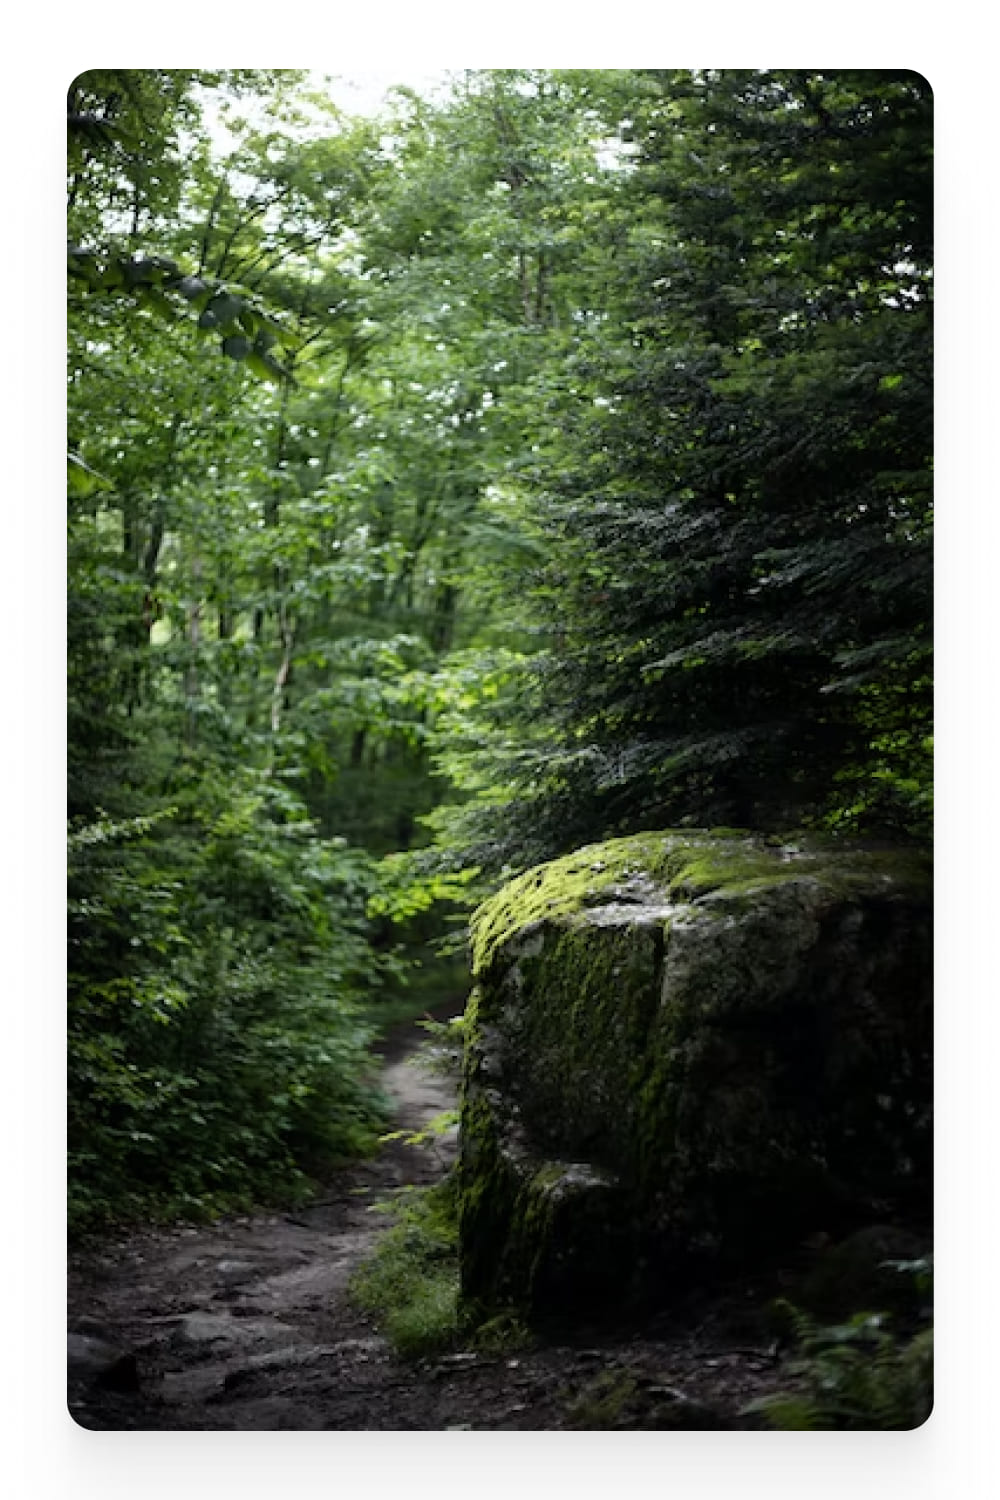 Photo of a path in the forest and a large stone.